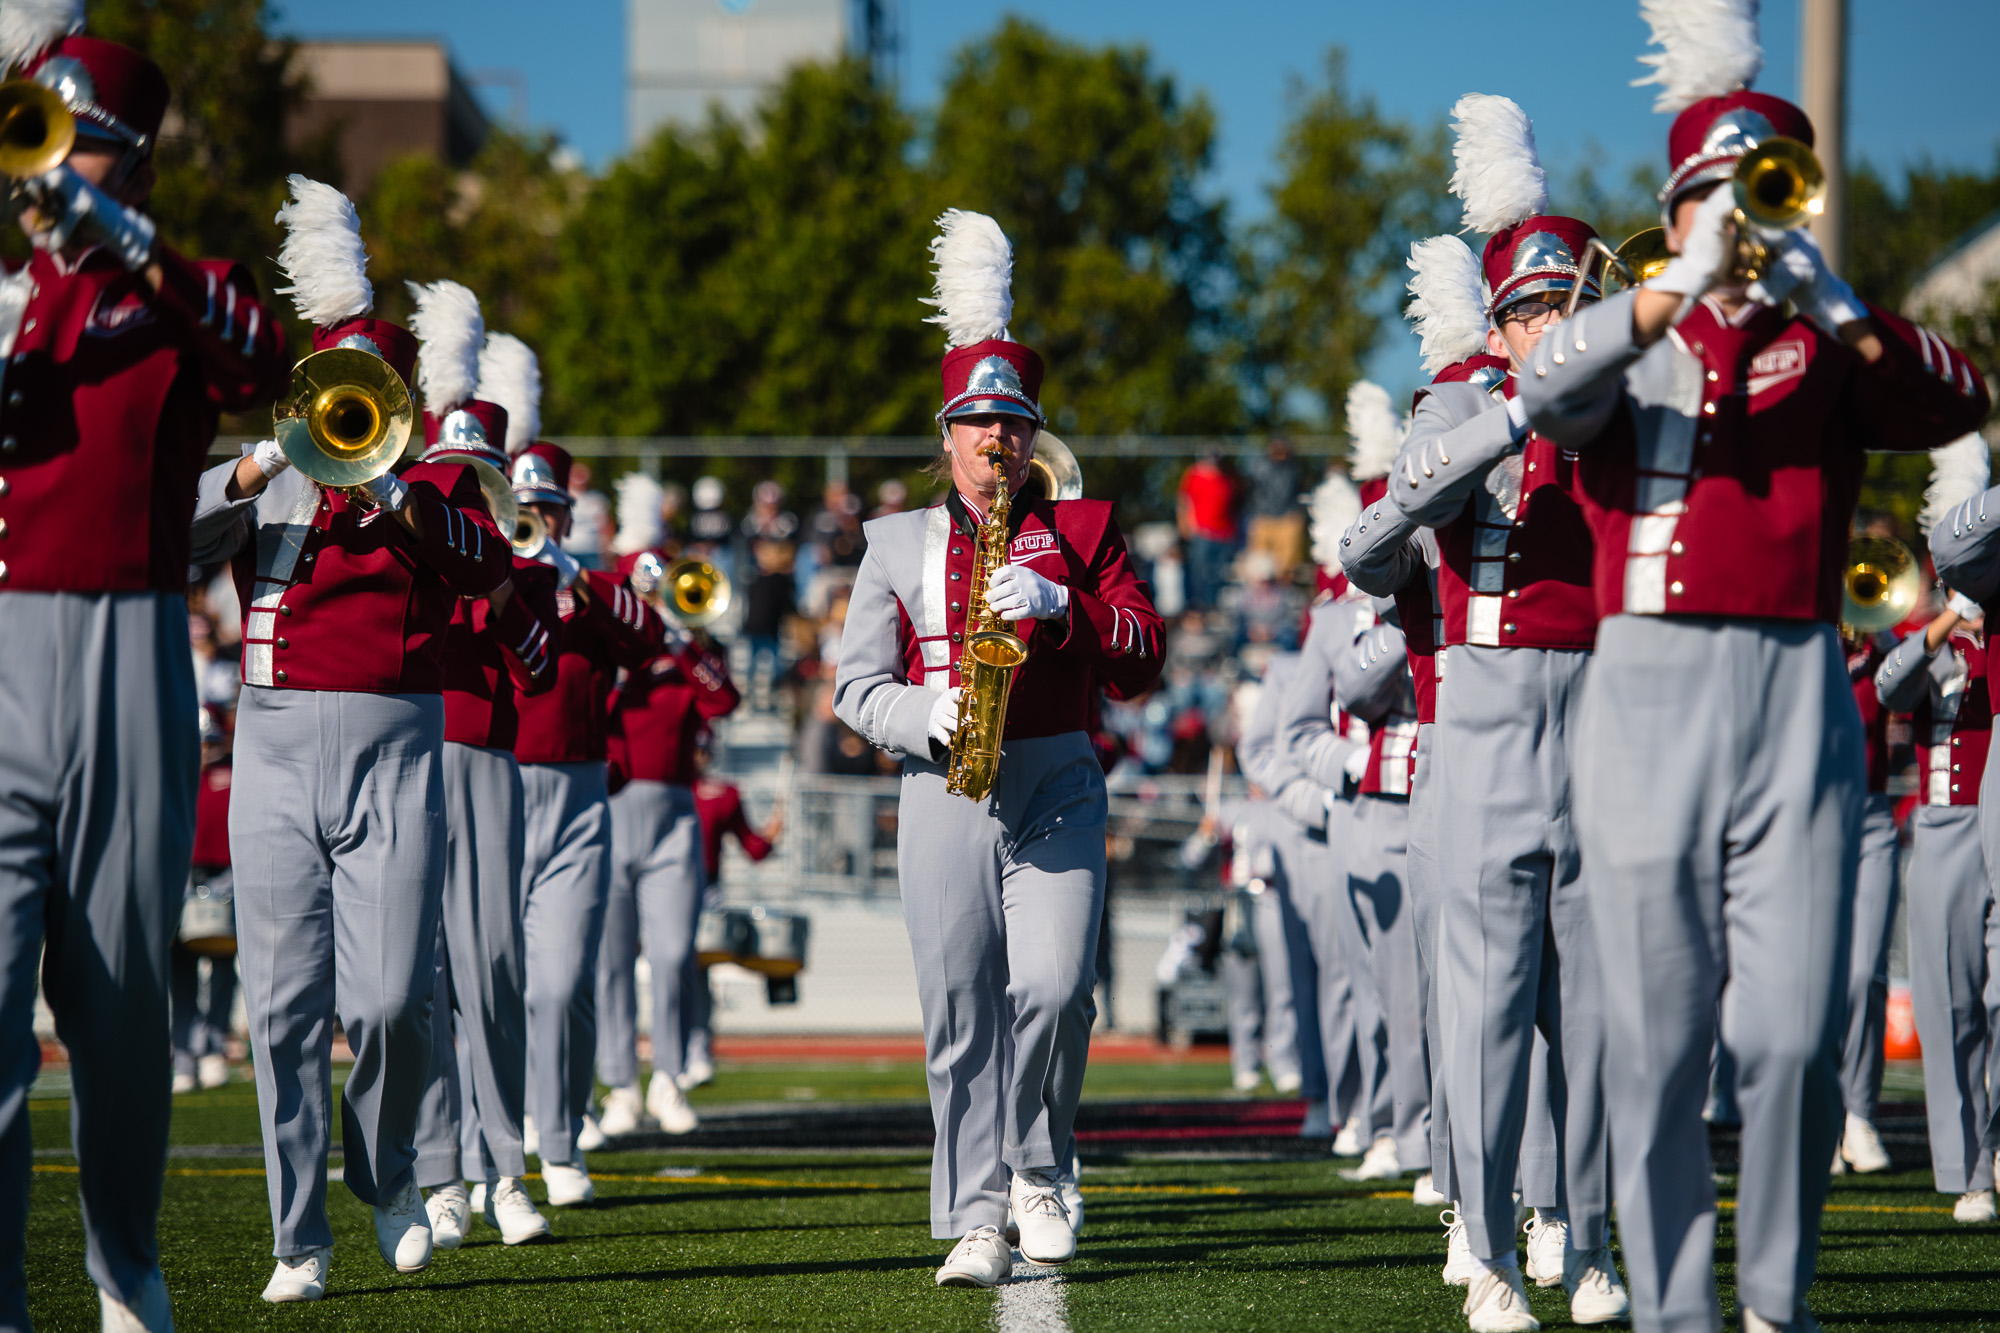 The IUP marching band performs during halftime on Saturday, October 5, 2019.